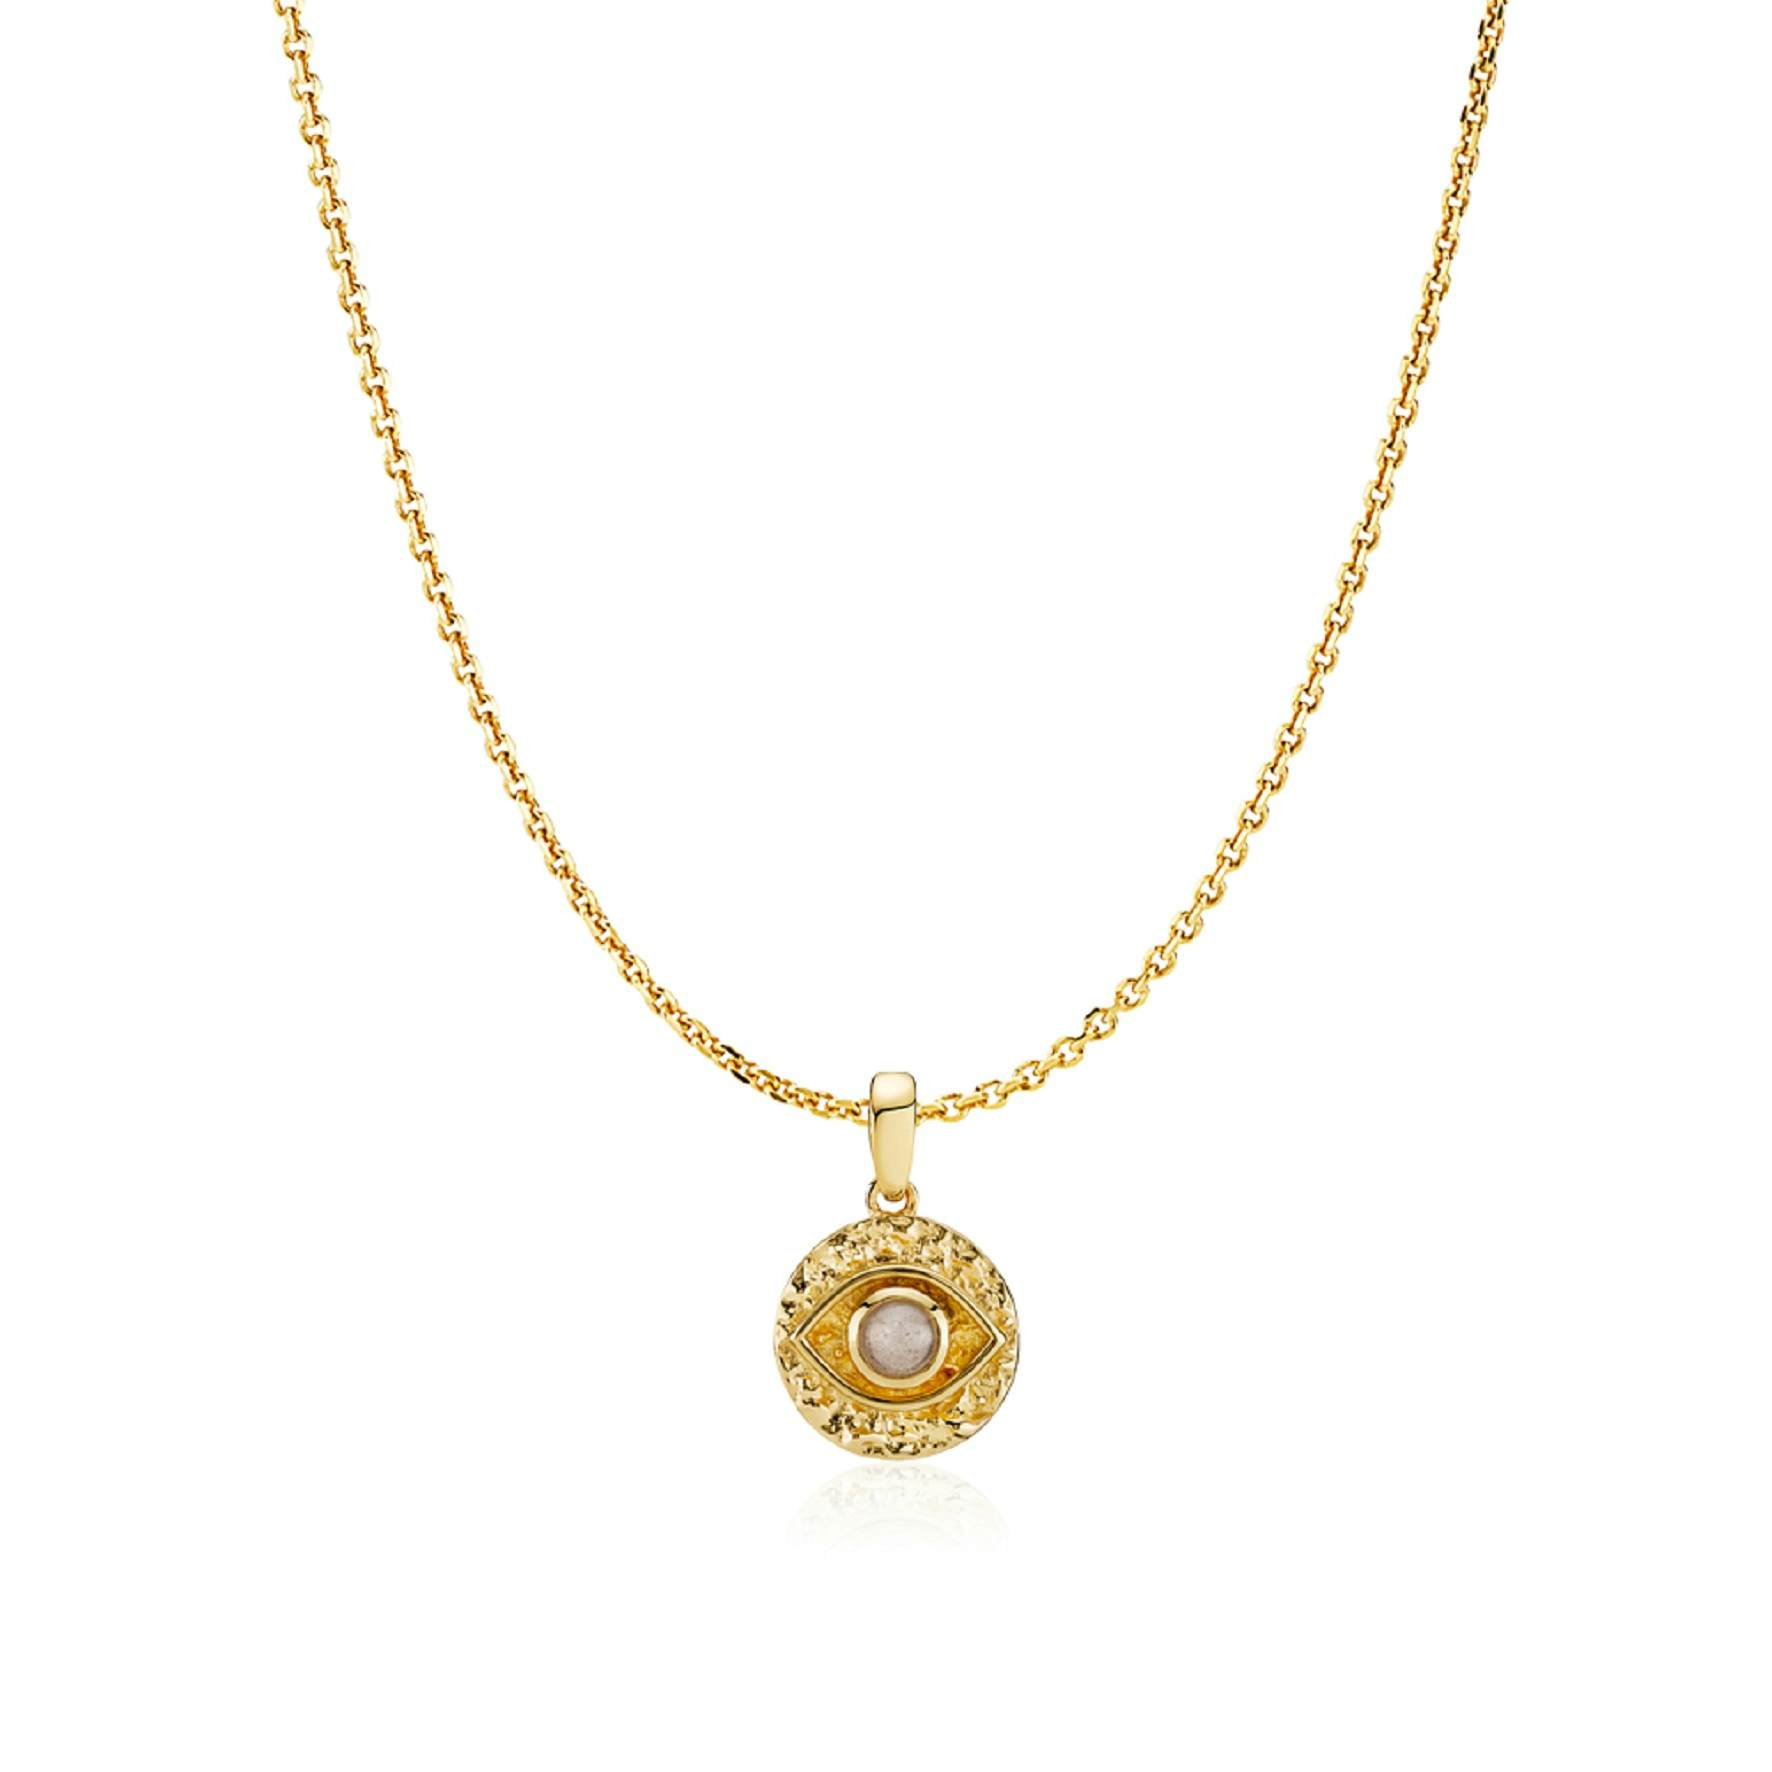 Hanna Martine by Sistie Necklace from Sistie in Goldplated-Silver Sterling 925||Blank